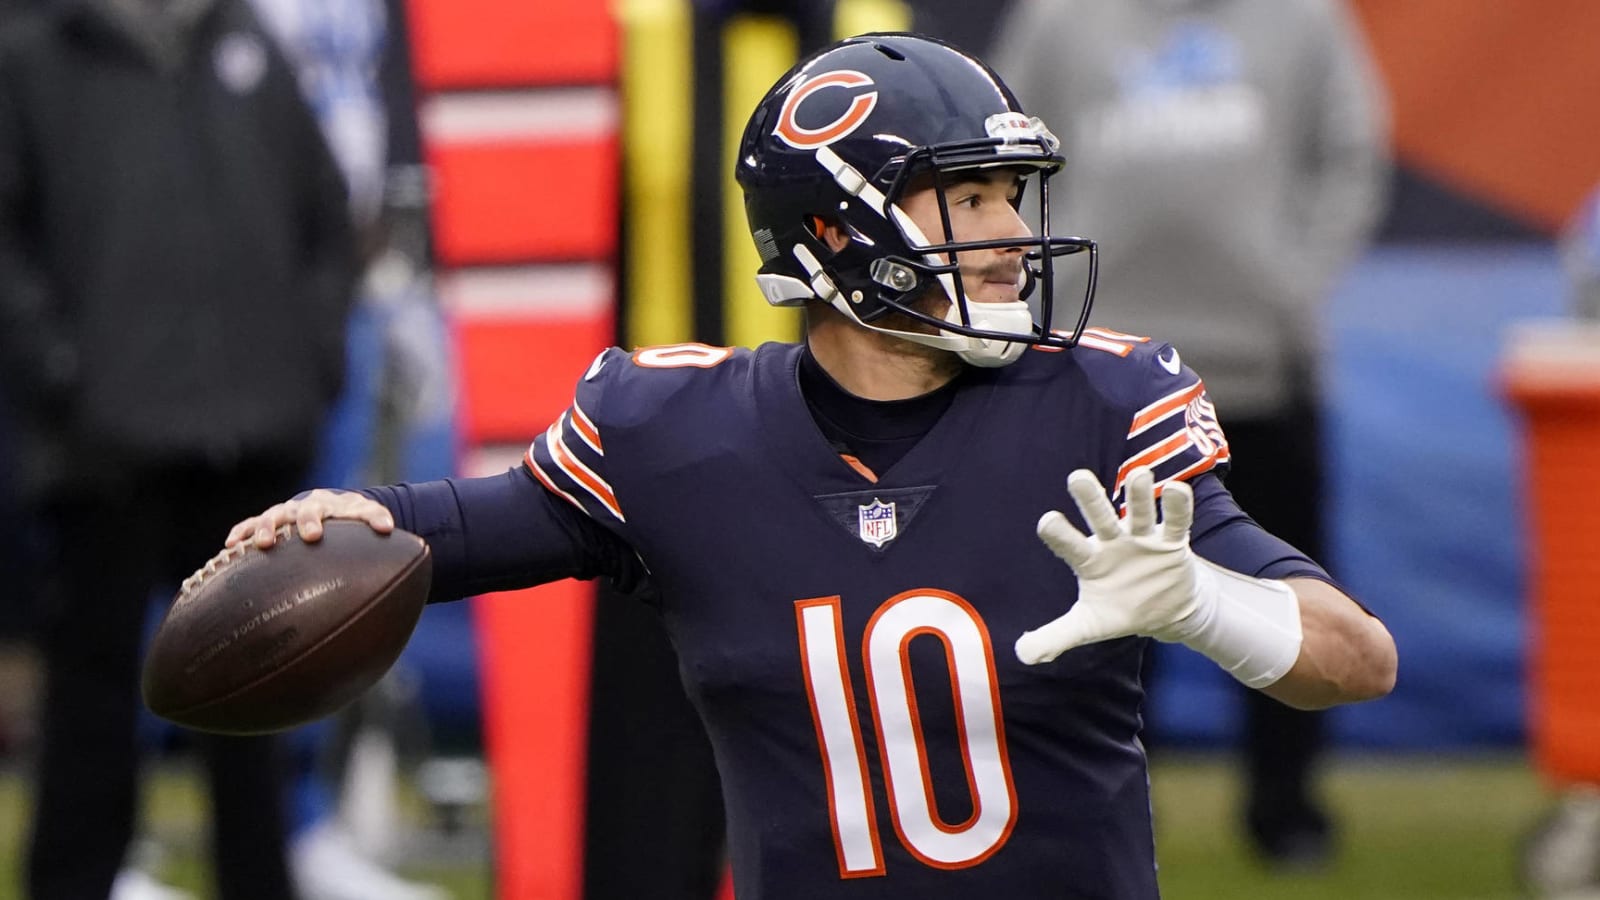 Report: Bears haven't ruled out Trubisky return in '21